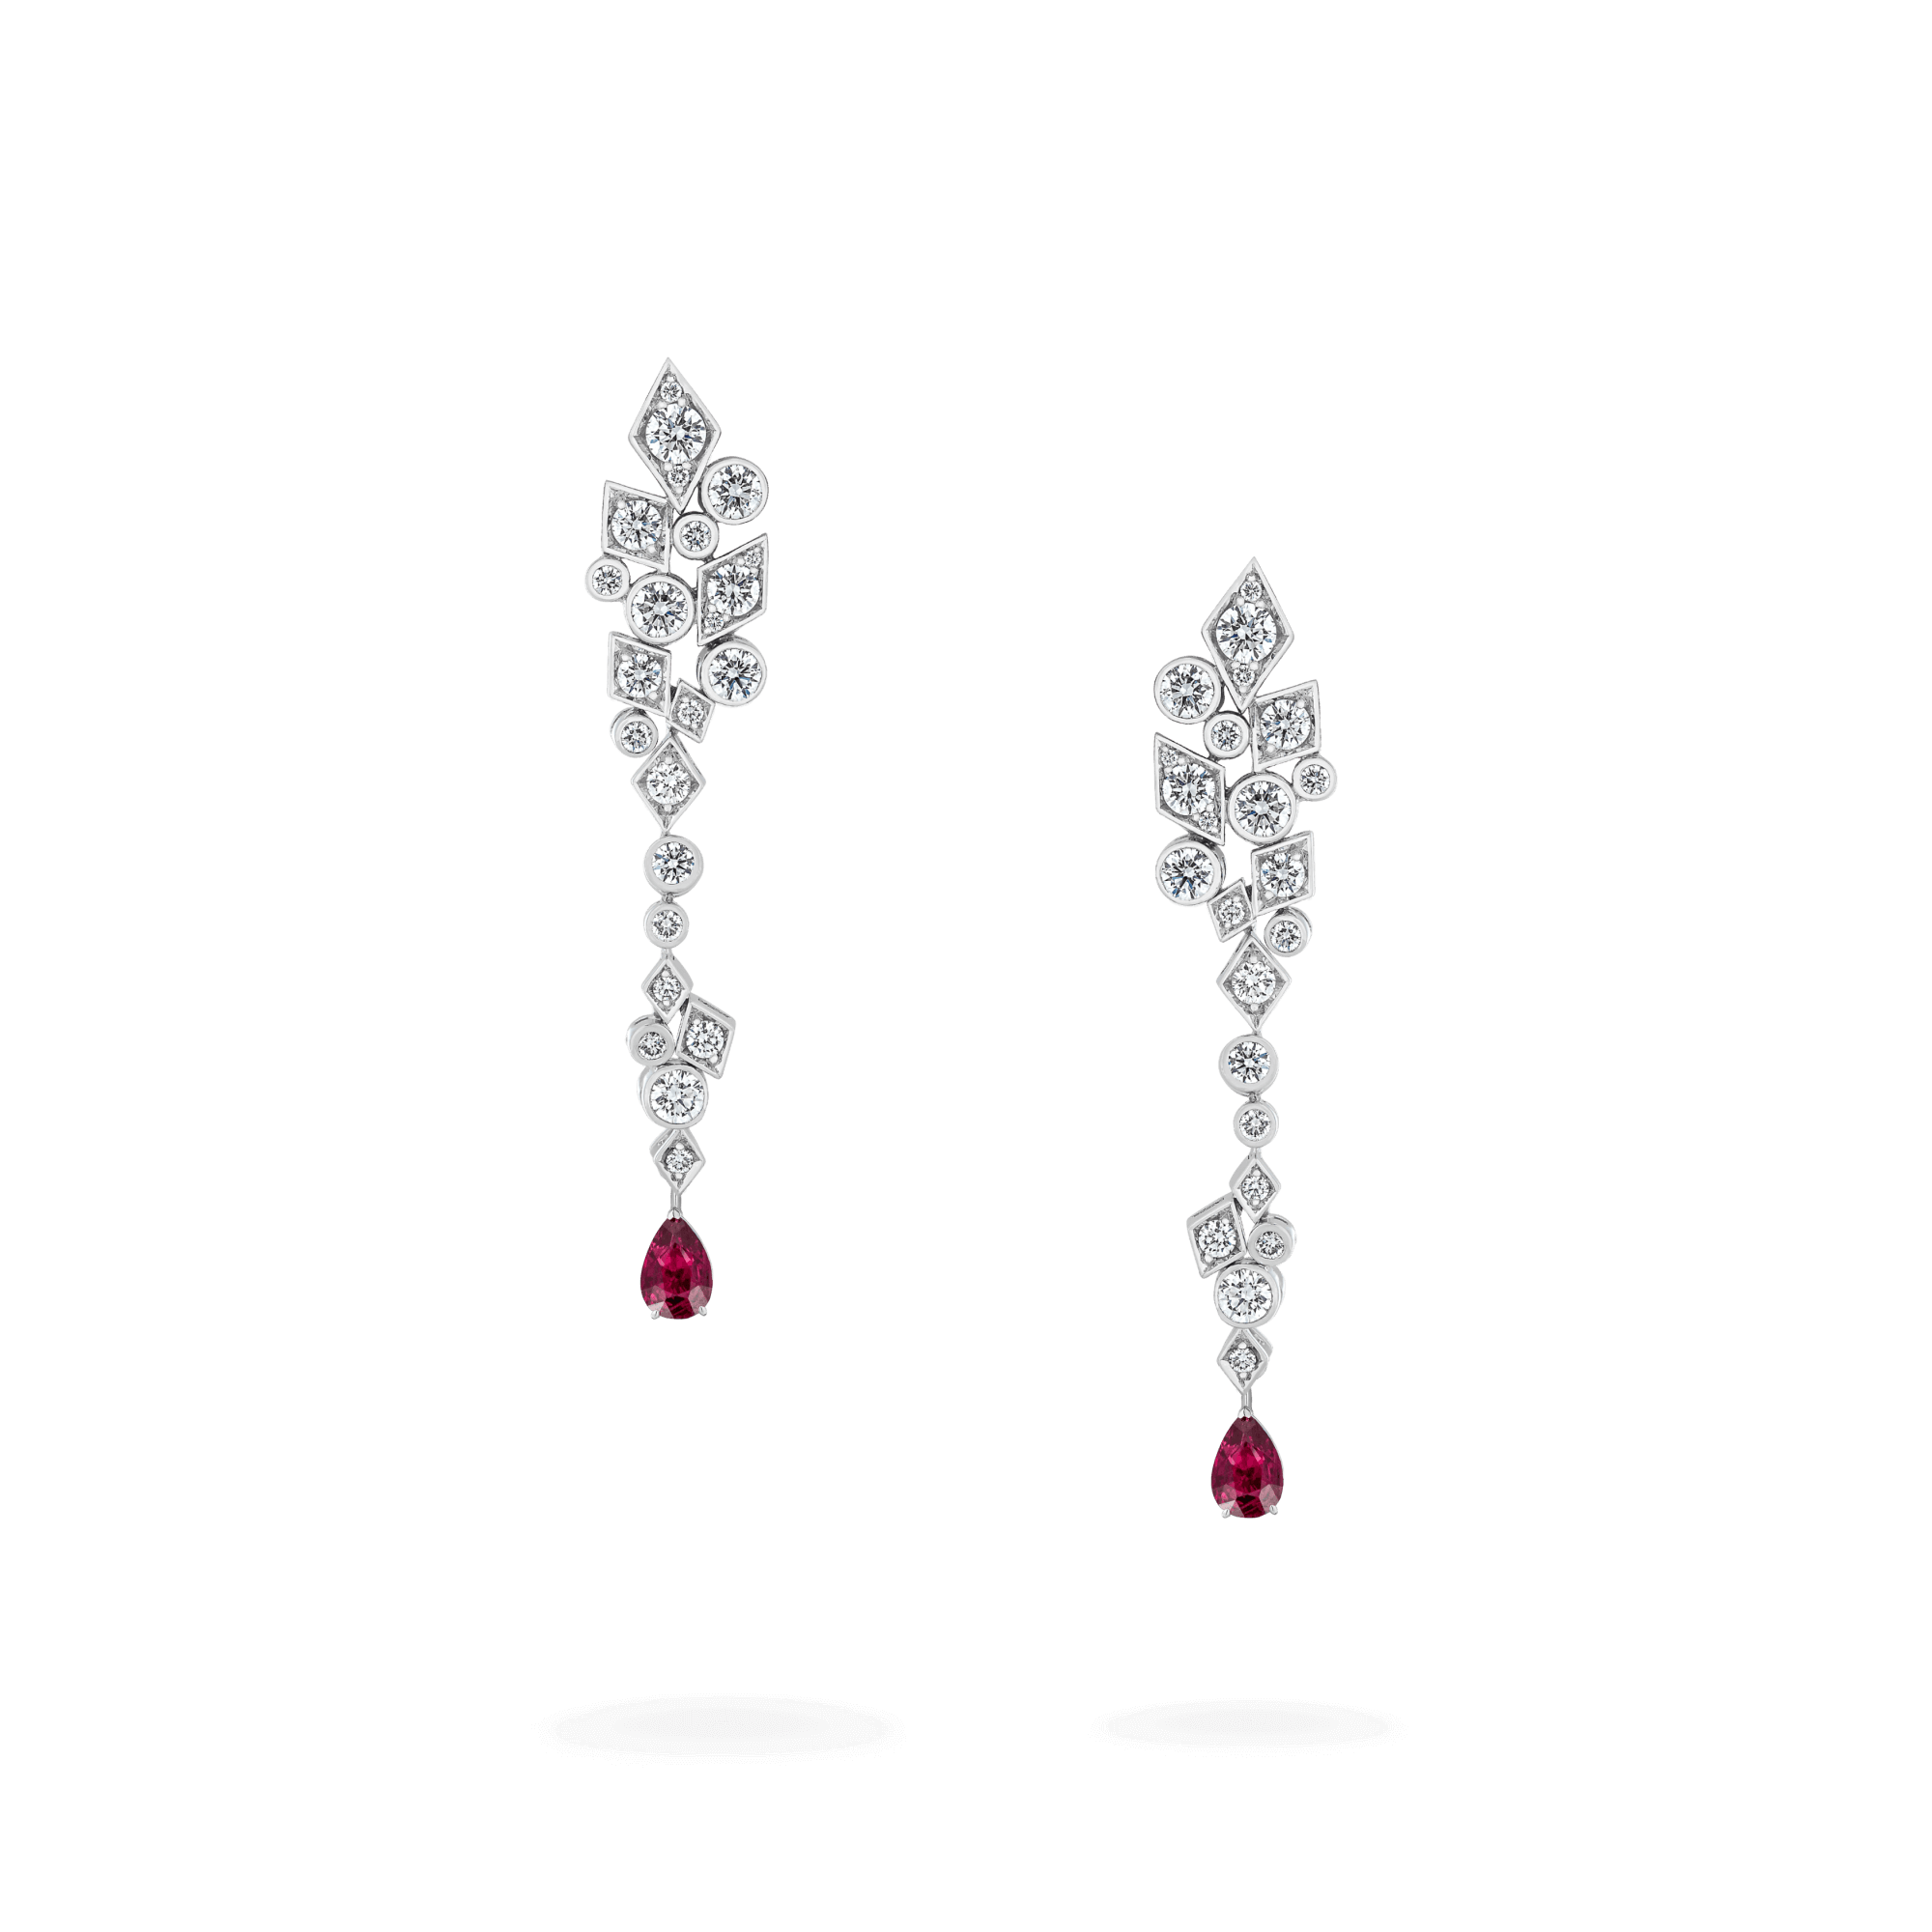 Garrard Albemarle Abstract jewellery collection Transformable Diamond Earrings In 18ct White Gold Ruby drops 2017415 2017497 Hero